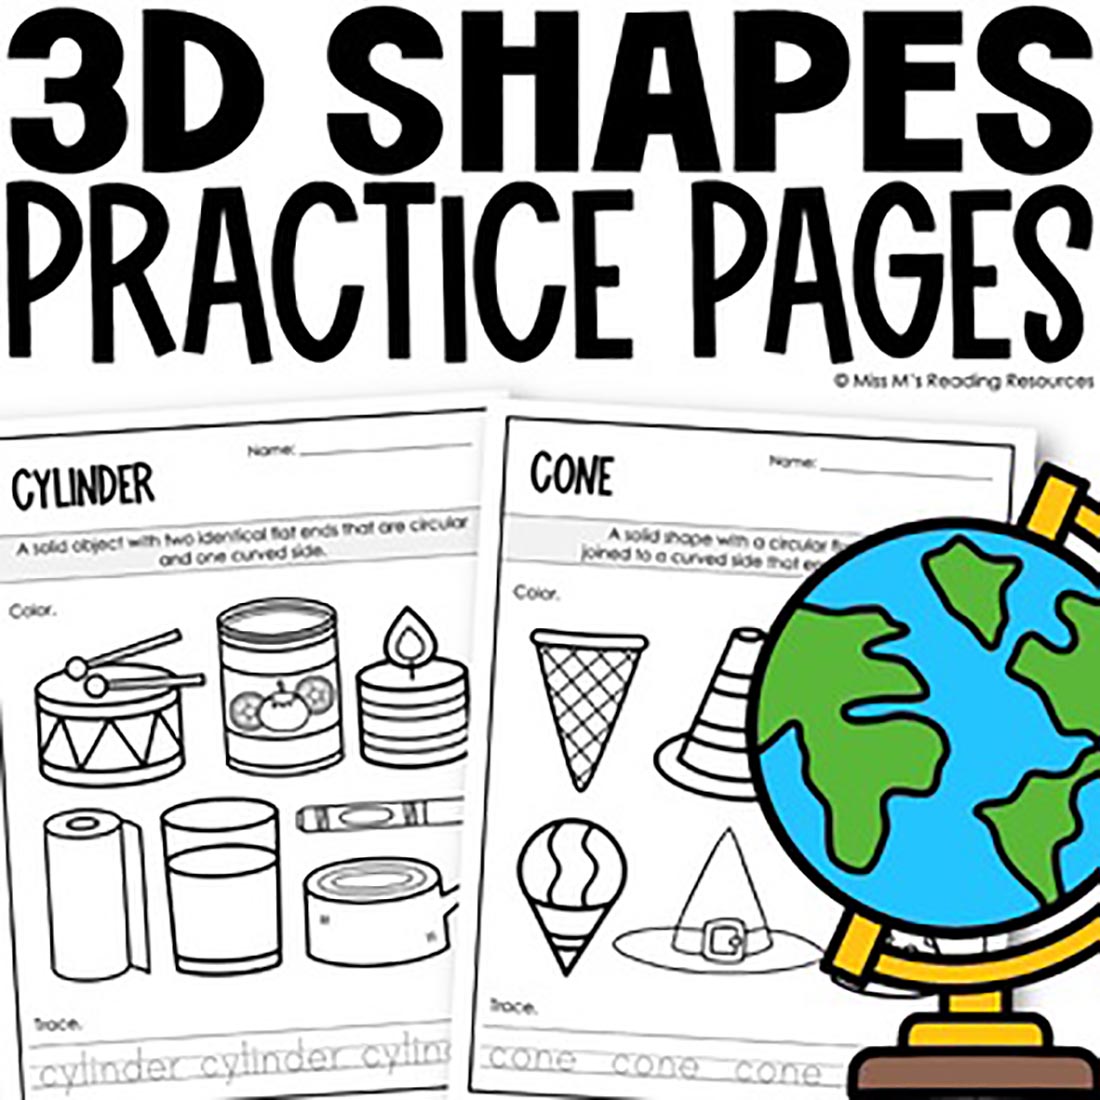 3D Shape Worksheets Kindergarten Math from Miss M's Reading Resources cover image.